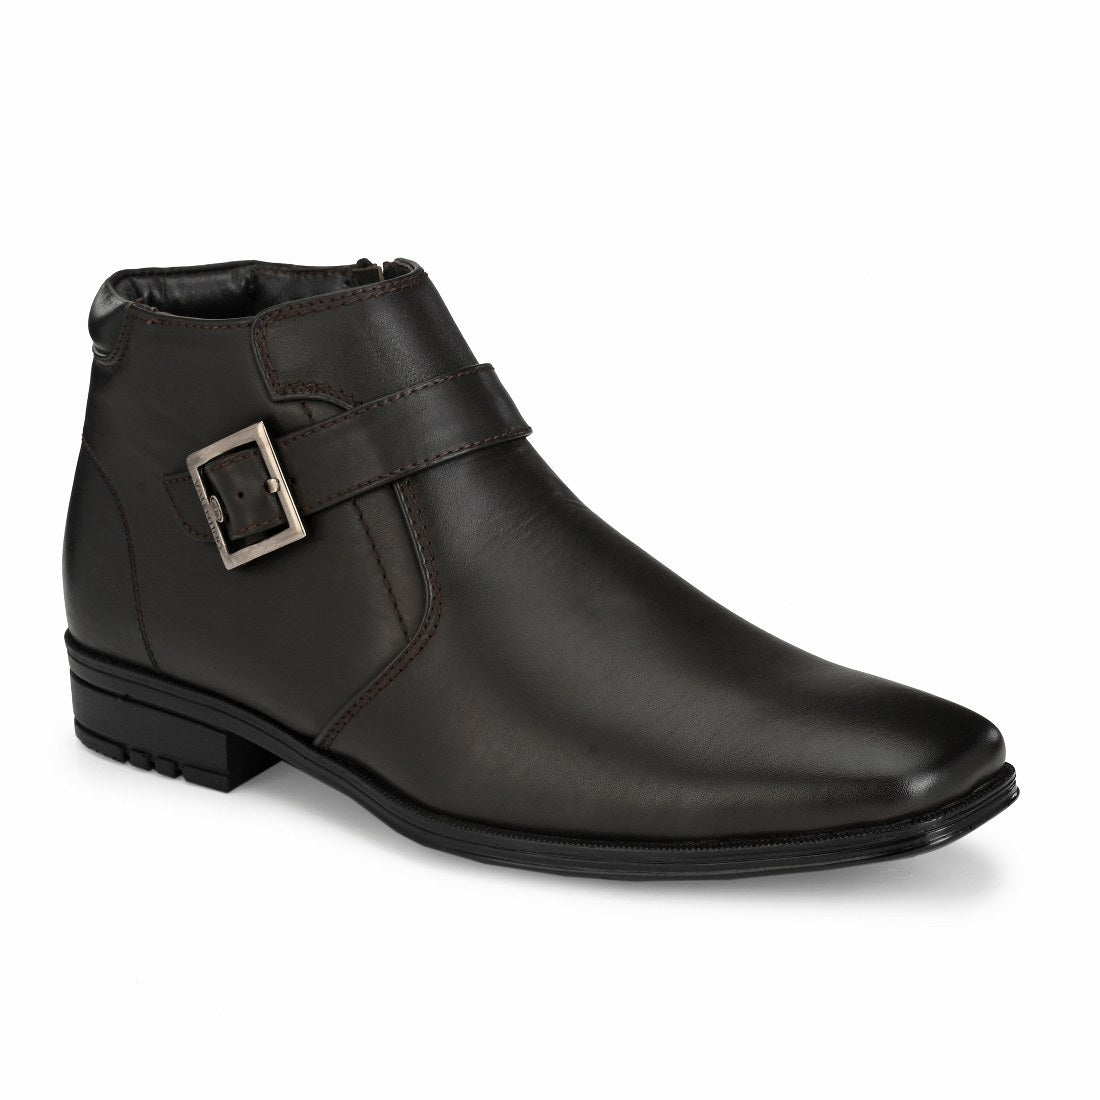 NEWTOP-84B MEN LEATHER BROWN FORMAL BOOT ANKLE ZIPPER